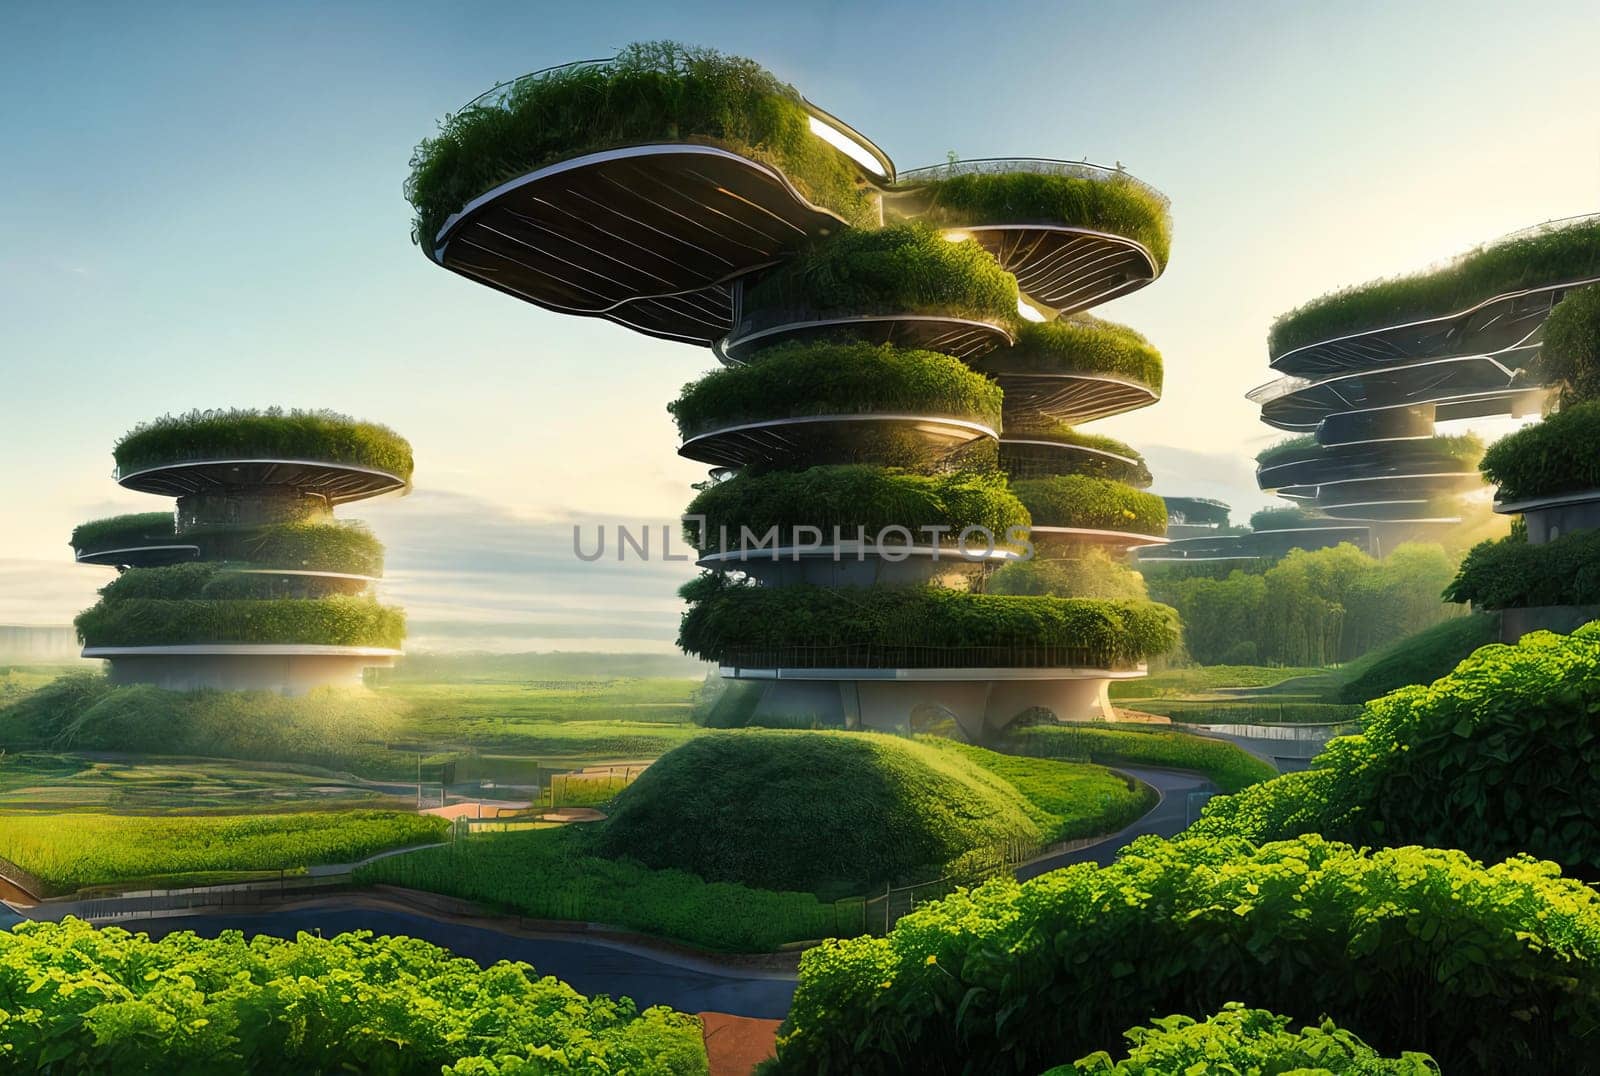 Explore a futuristic digital masterpiece envisioning a high-tech agricultural hub. See automated farming machines thriving vertical gardens.